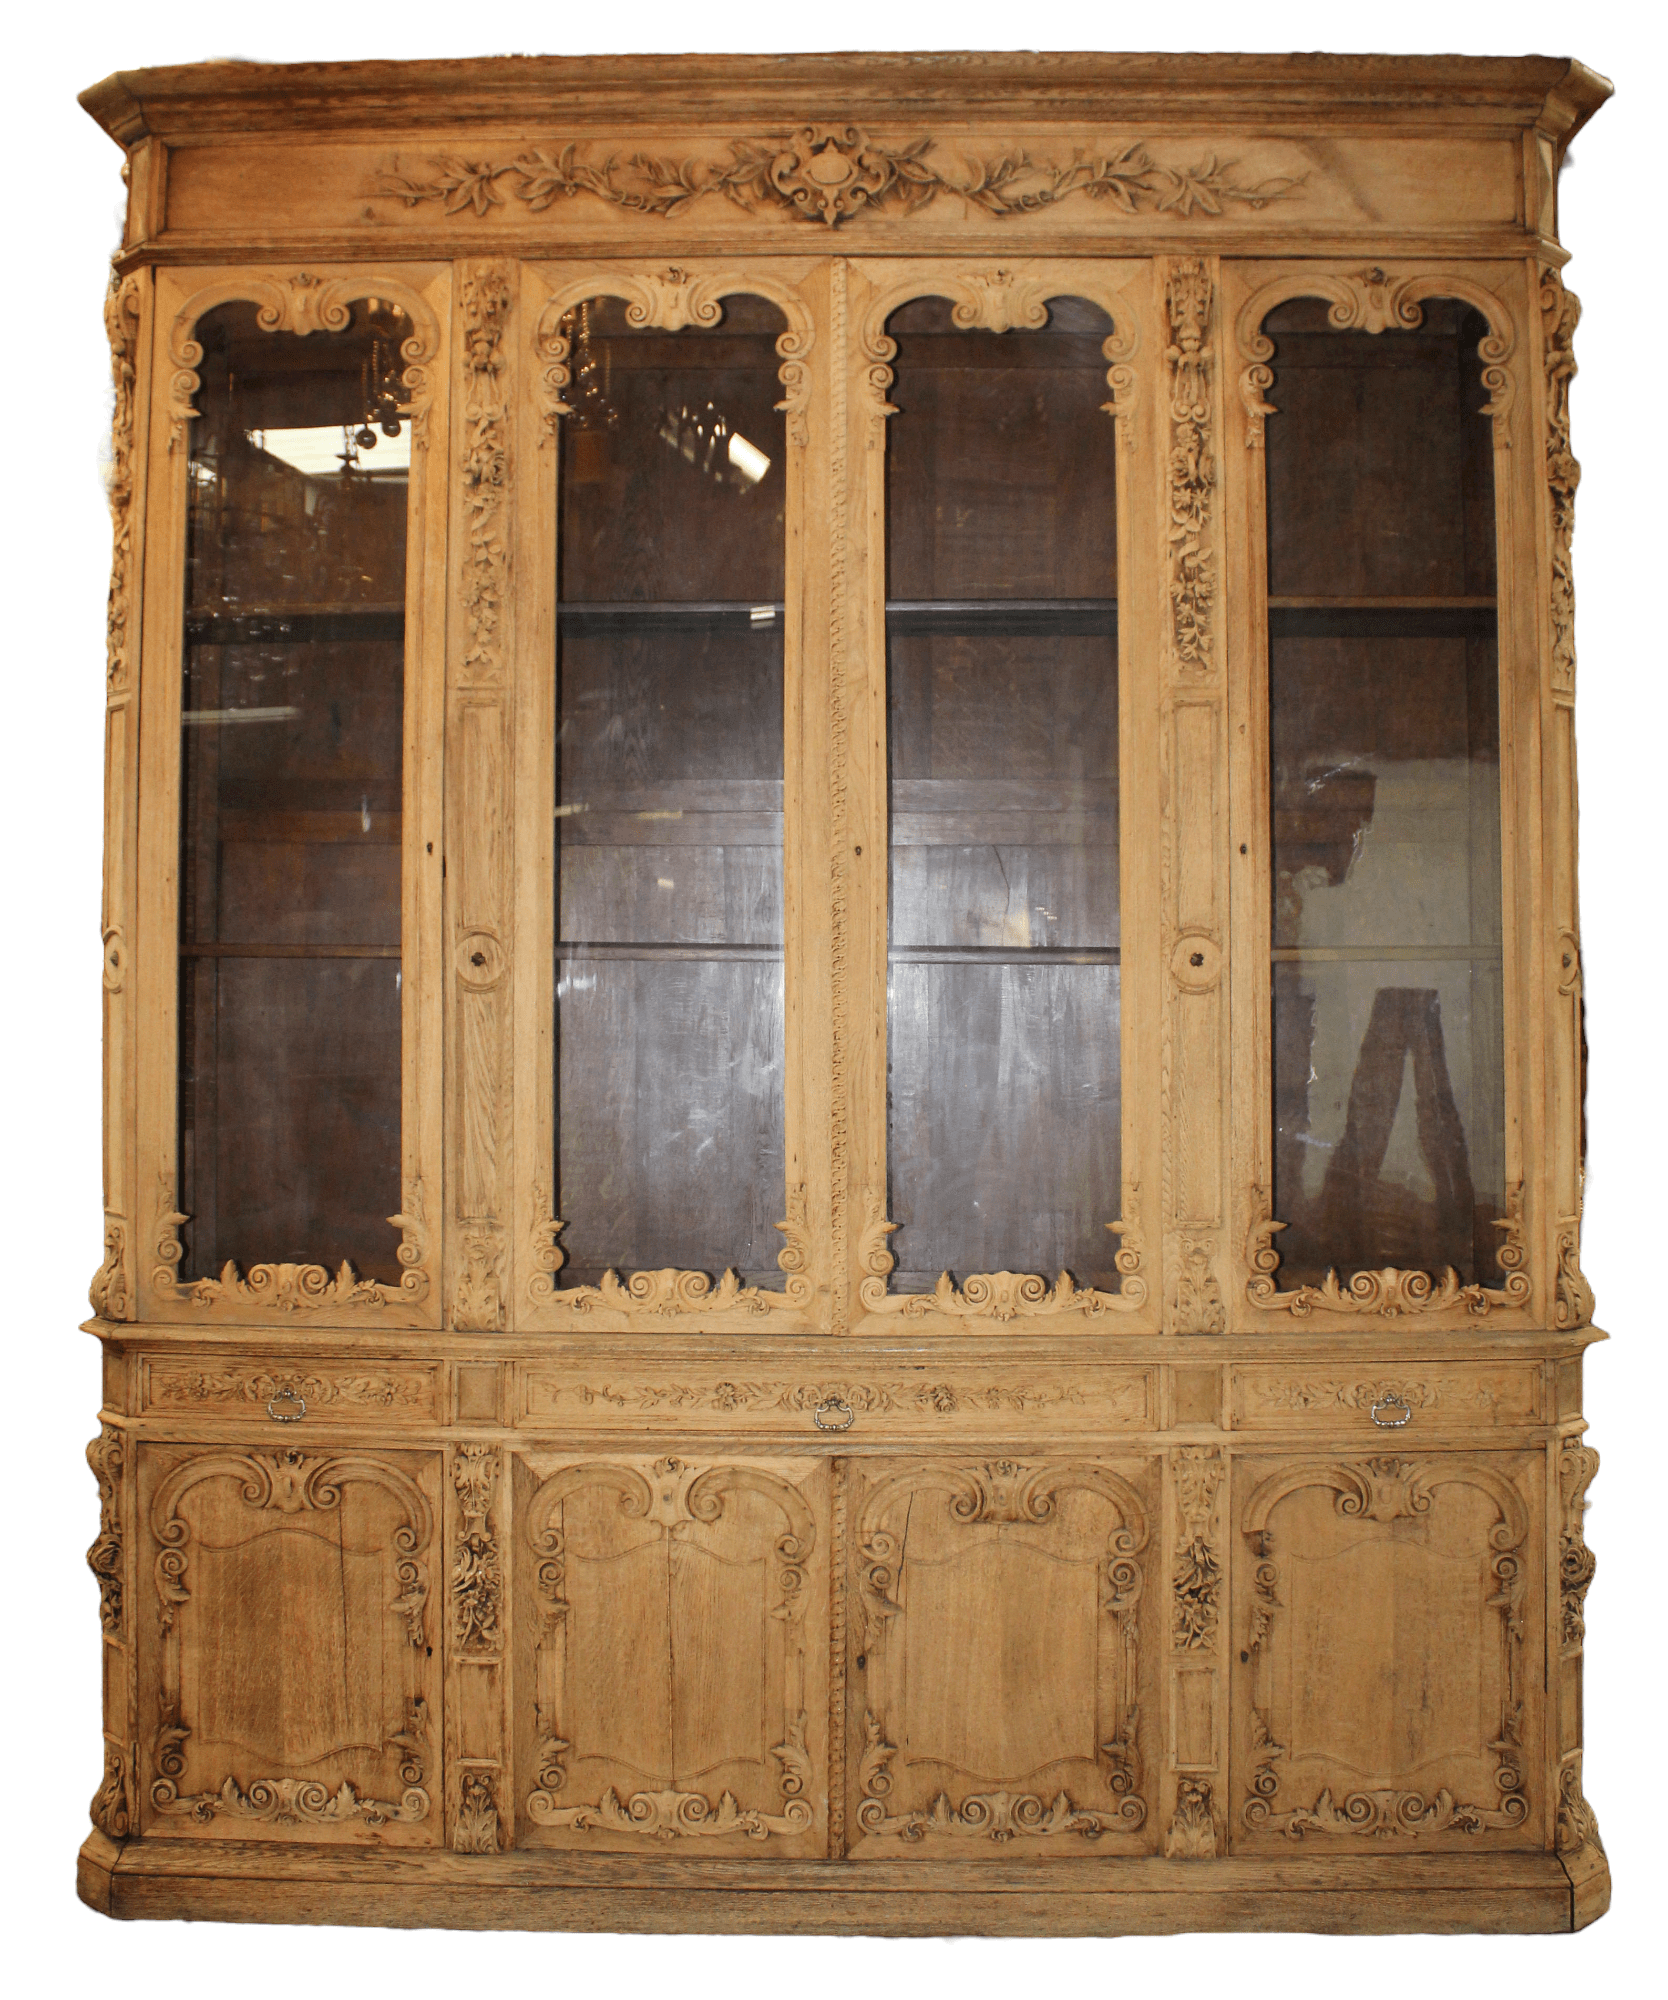 French Chateau bookcase in bleached oak